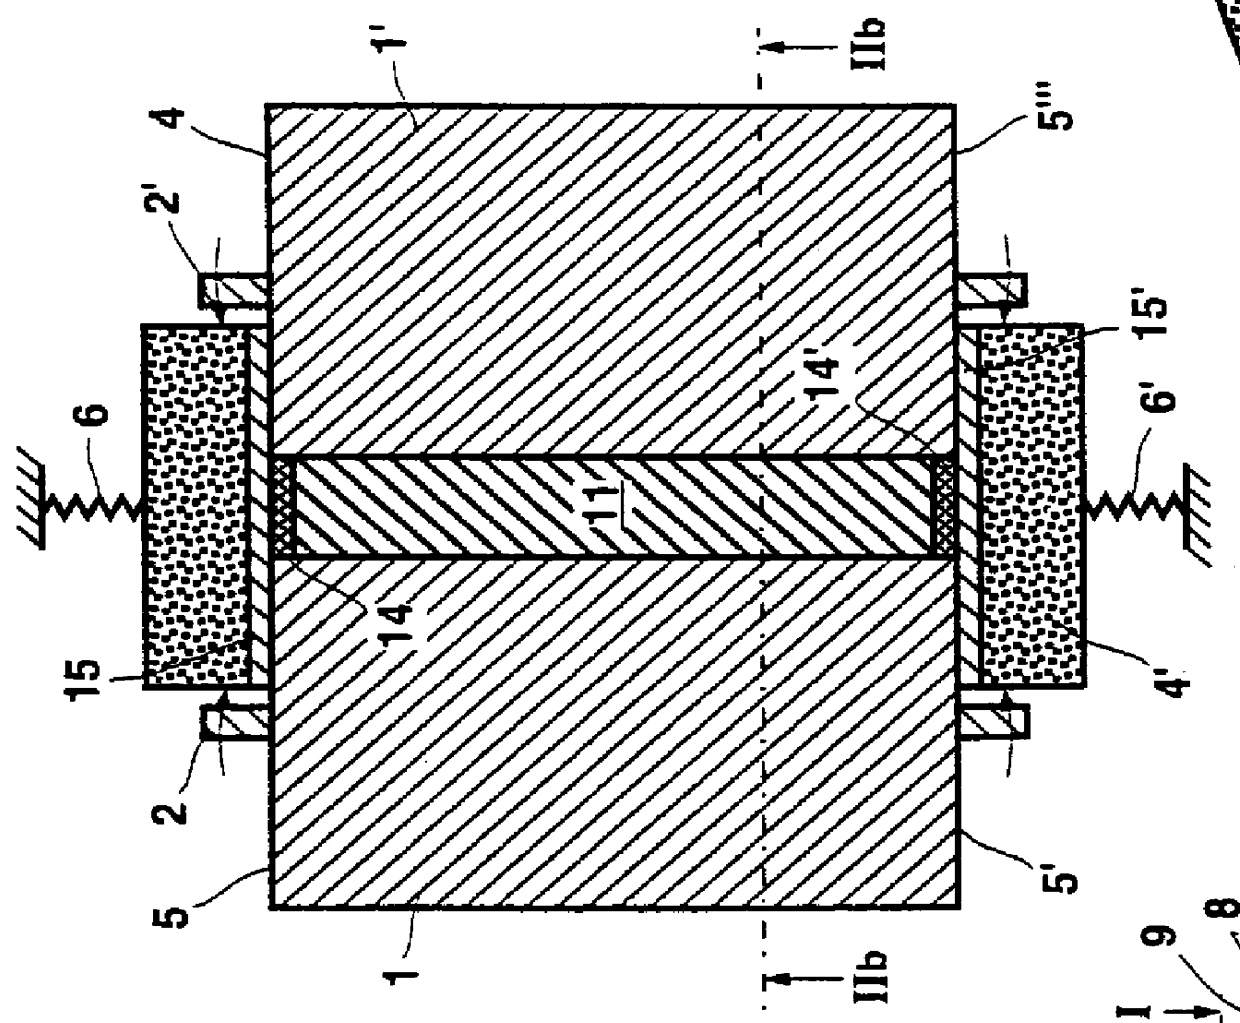 Protective coating comprising boron nitride for refractory material members of an ingot mold for continuous casting of metals